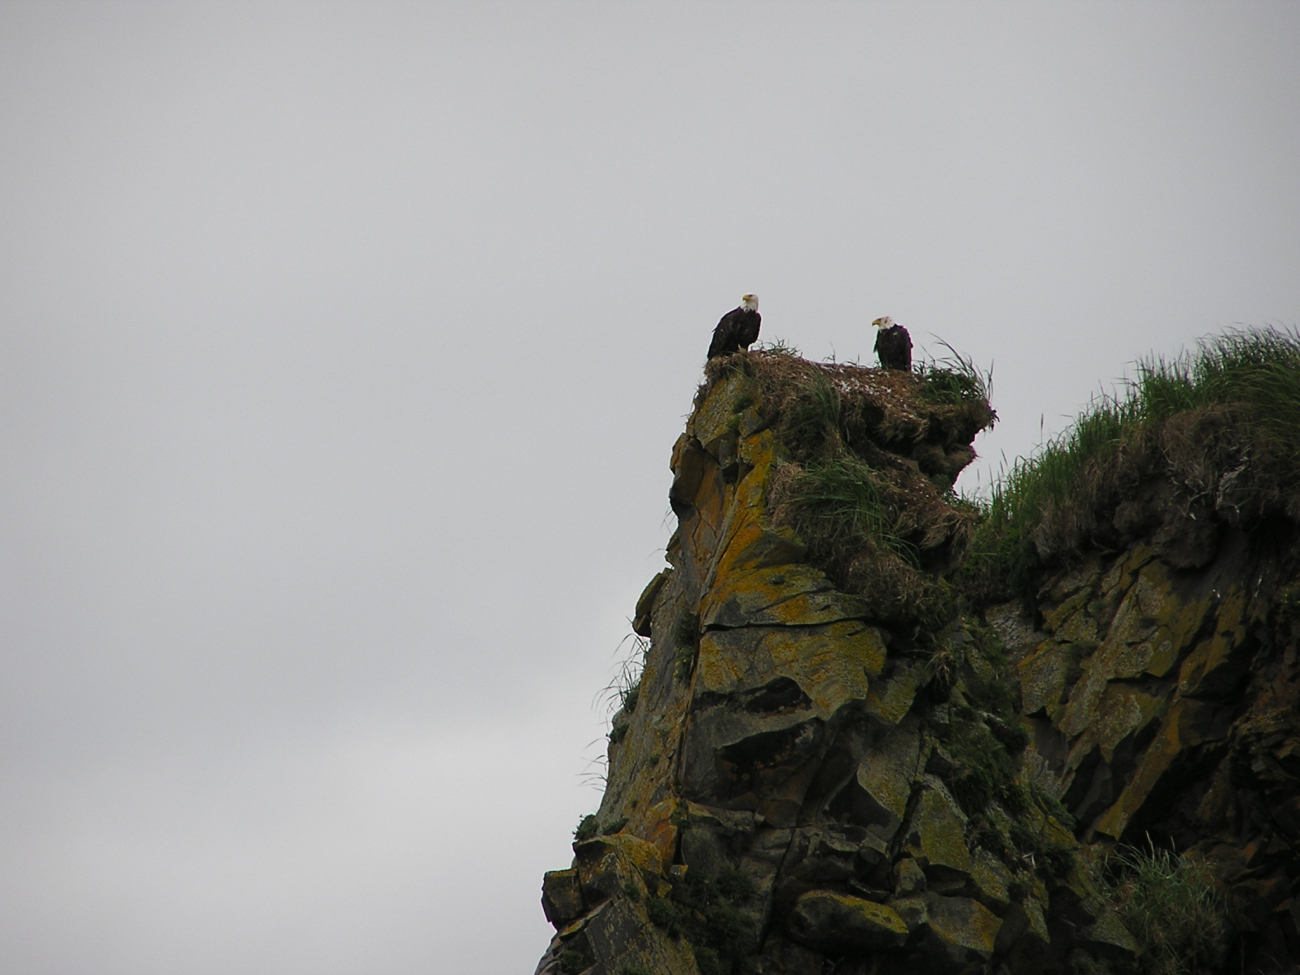 Bald eagles at the edge of a cliff